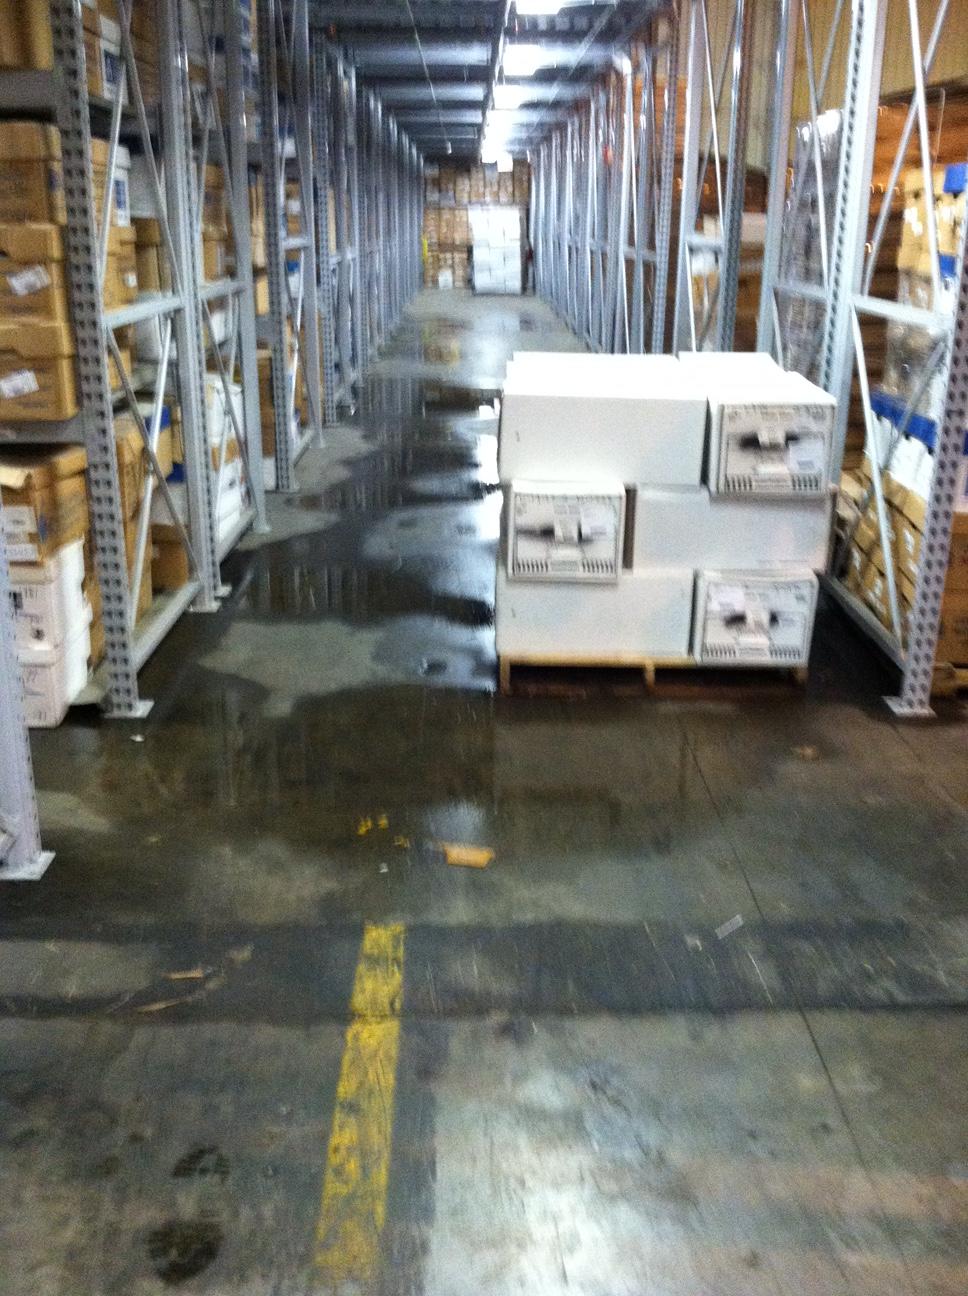 Responding to a commercial water loss.